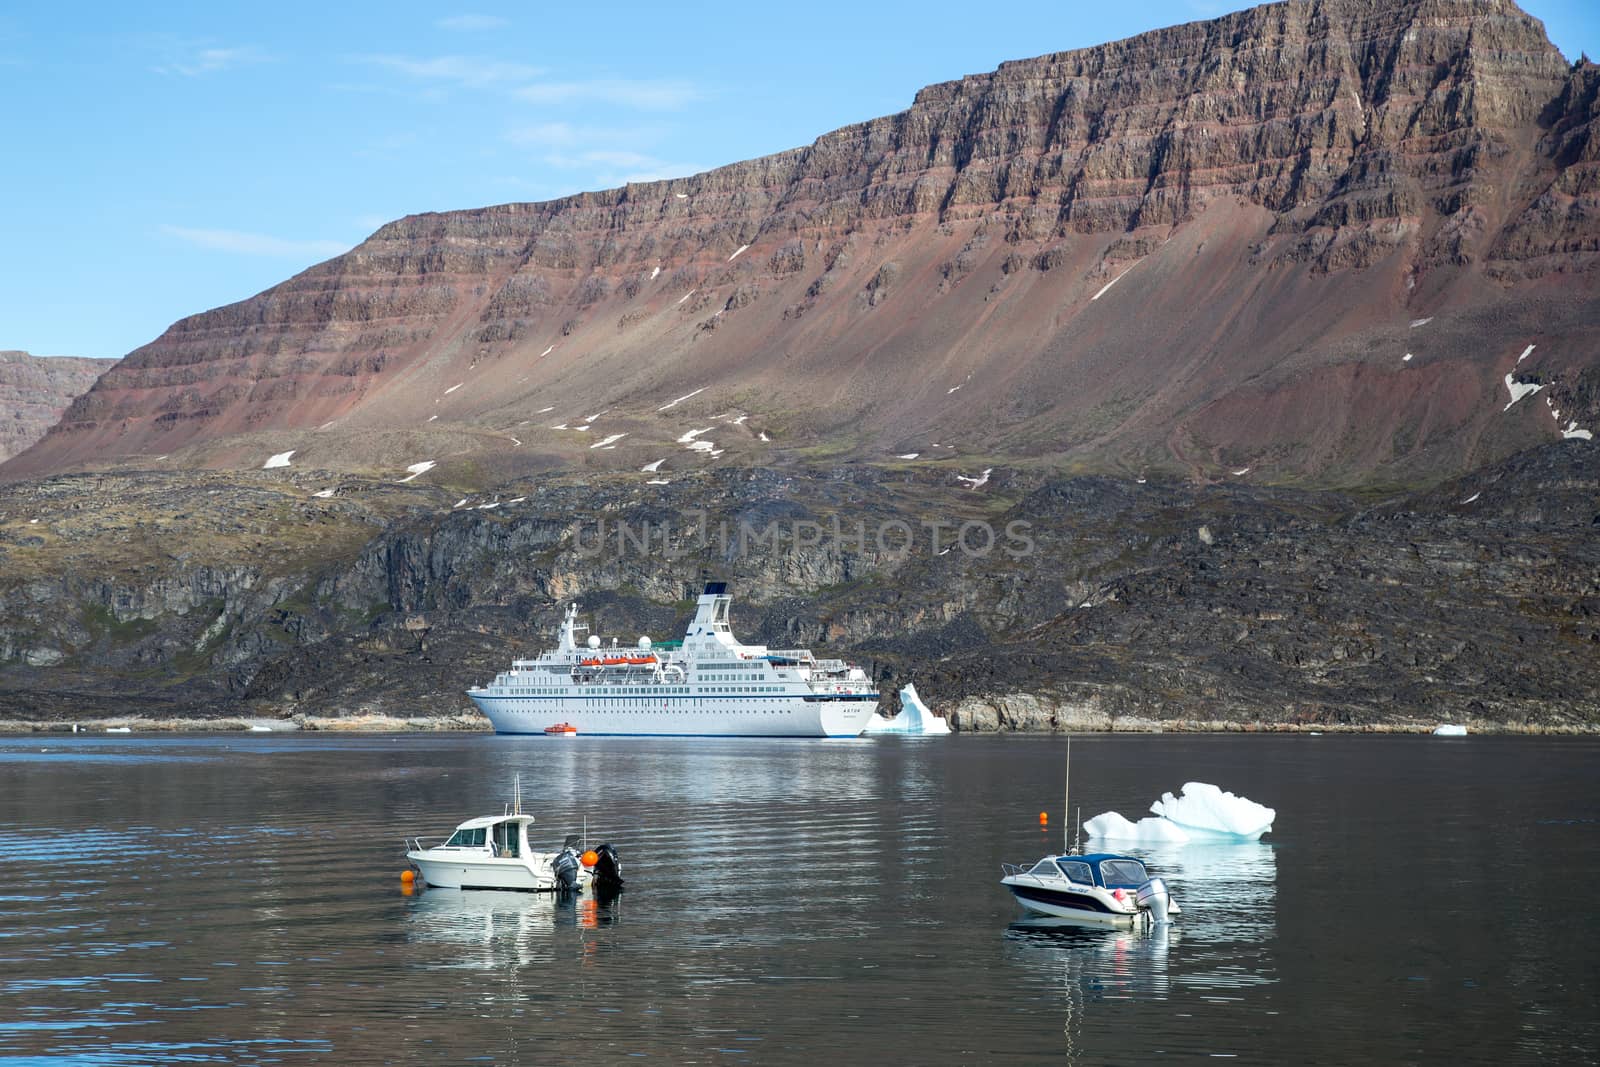 Cruise ship anchored at Qeqertarsuaq Harbor, Greenland by oliverfoerstner